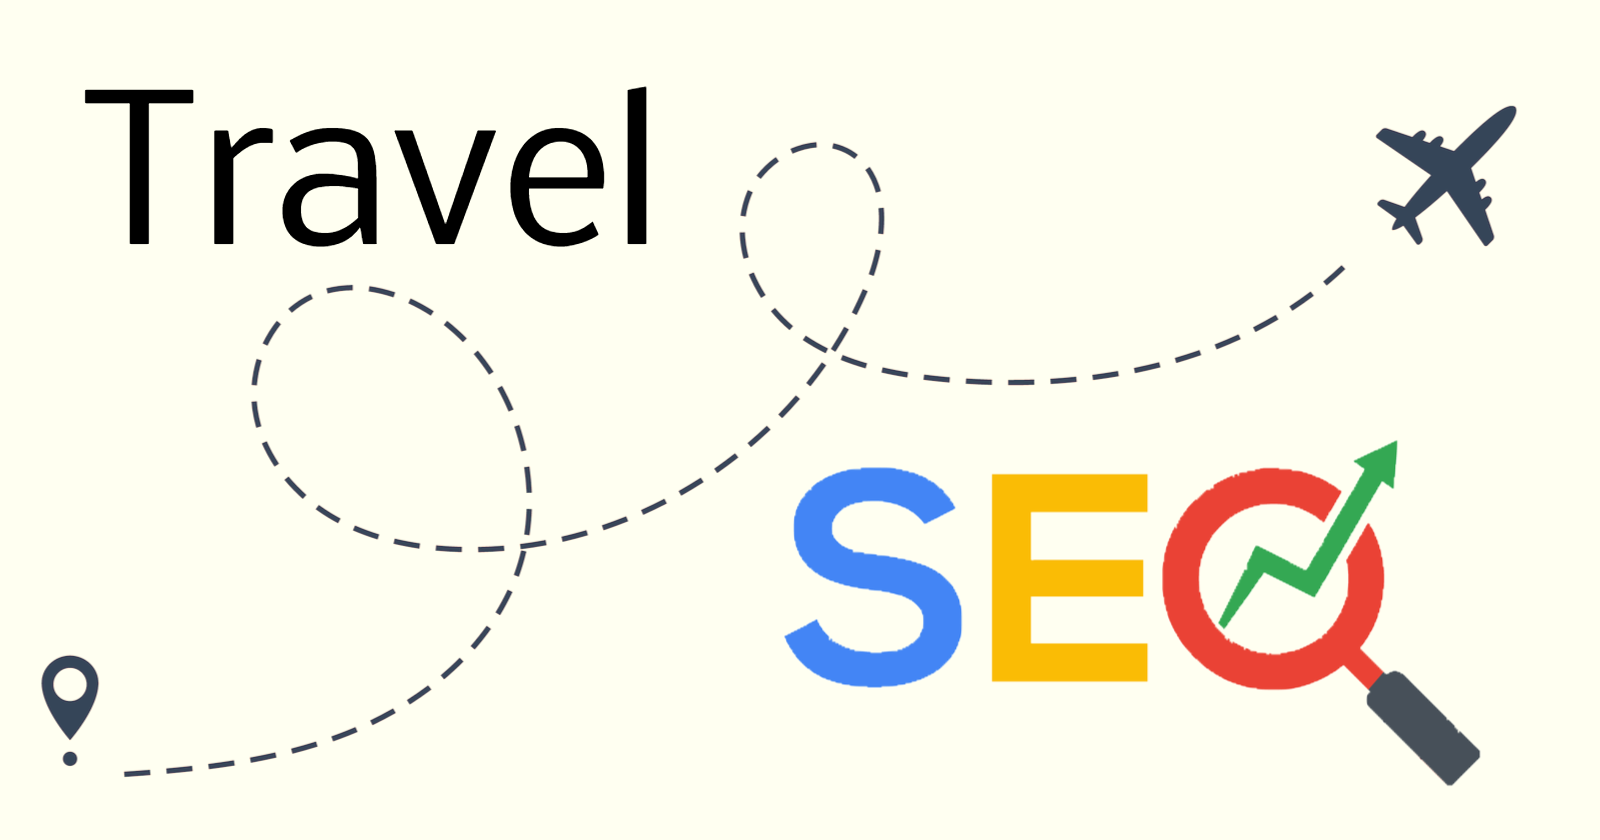 What We Learned from Analyzing 98K Ranked URLs in Travel